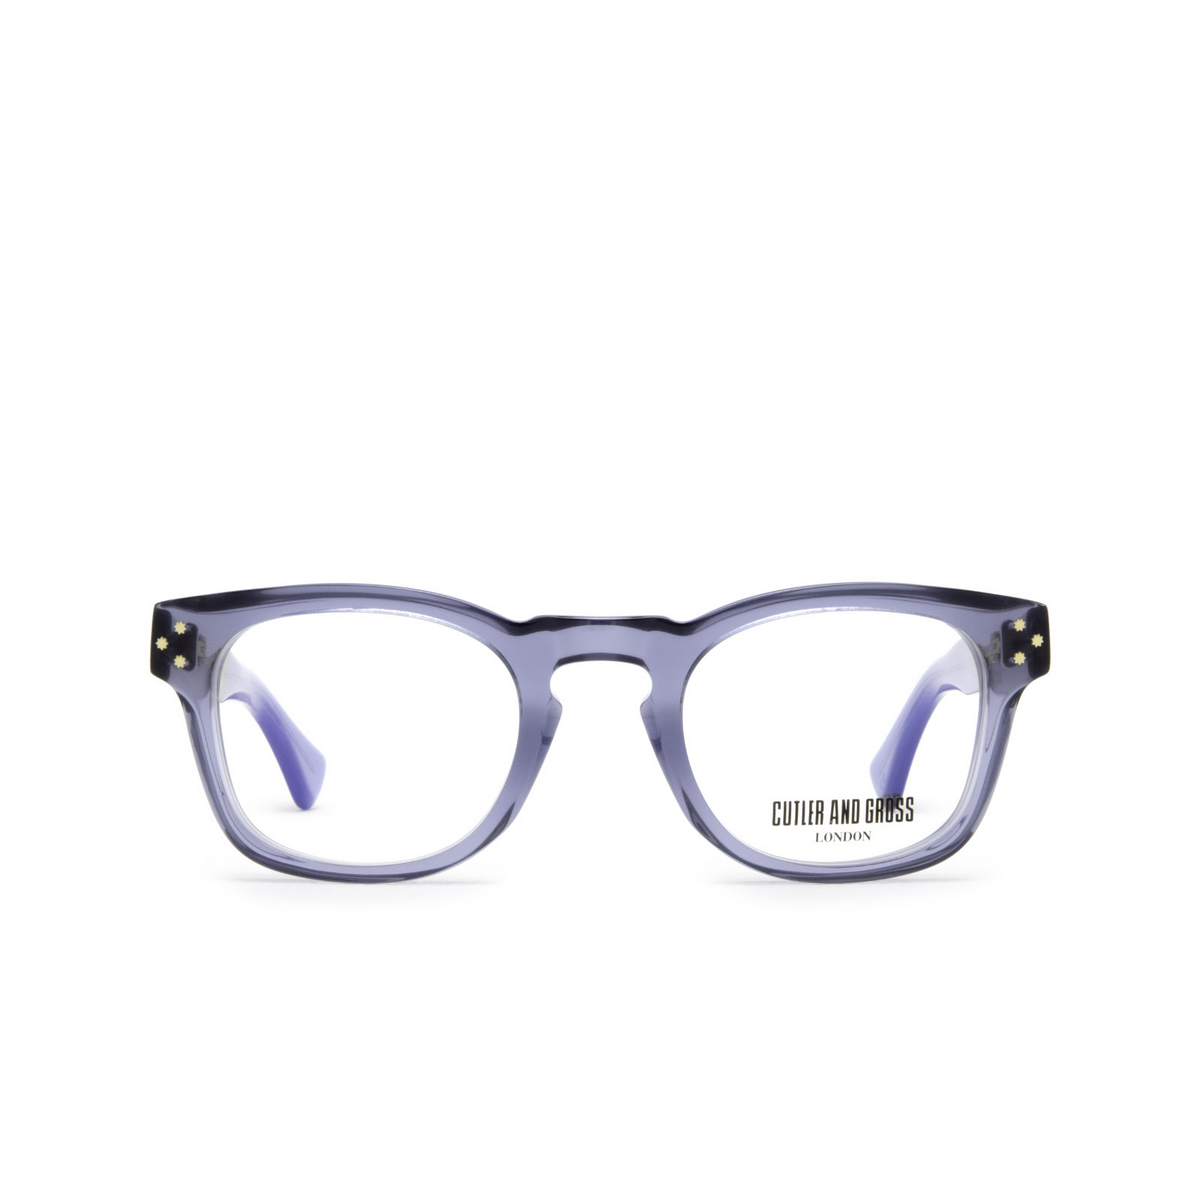 Cutler and Gross 1389 Eyeglasses 04 Brooklyn Blue - front view